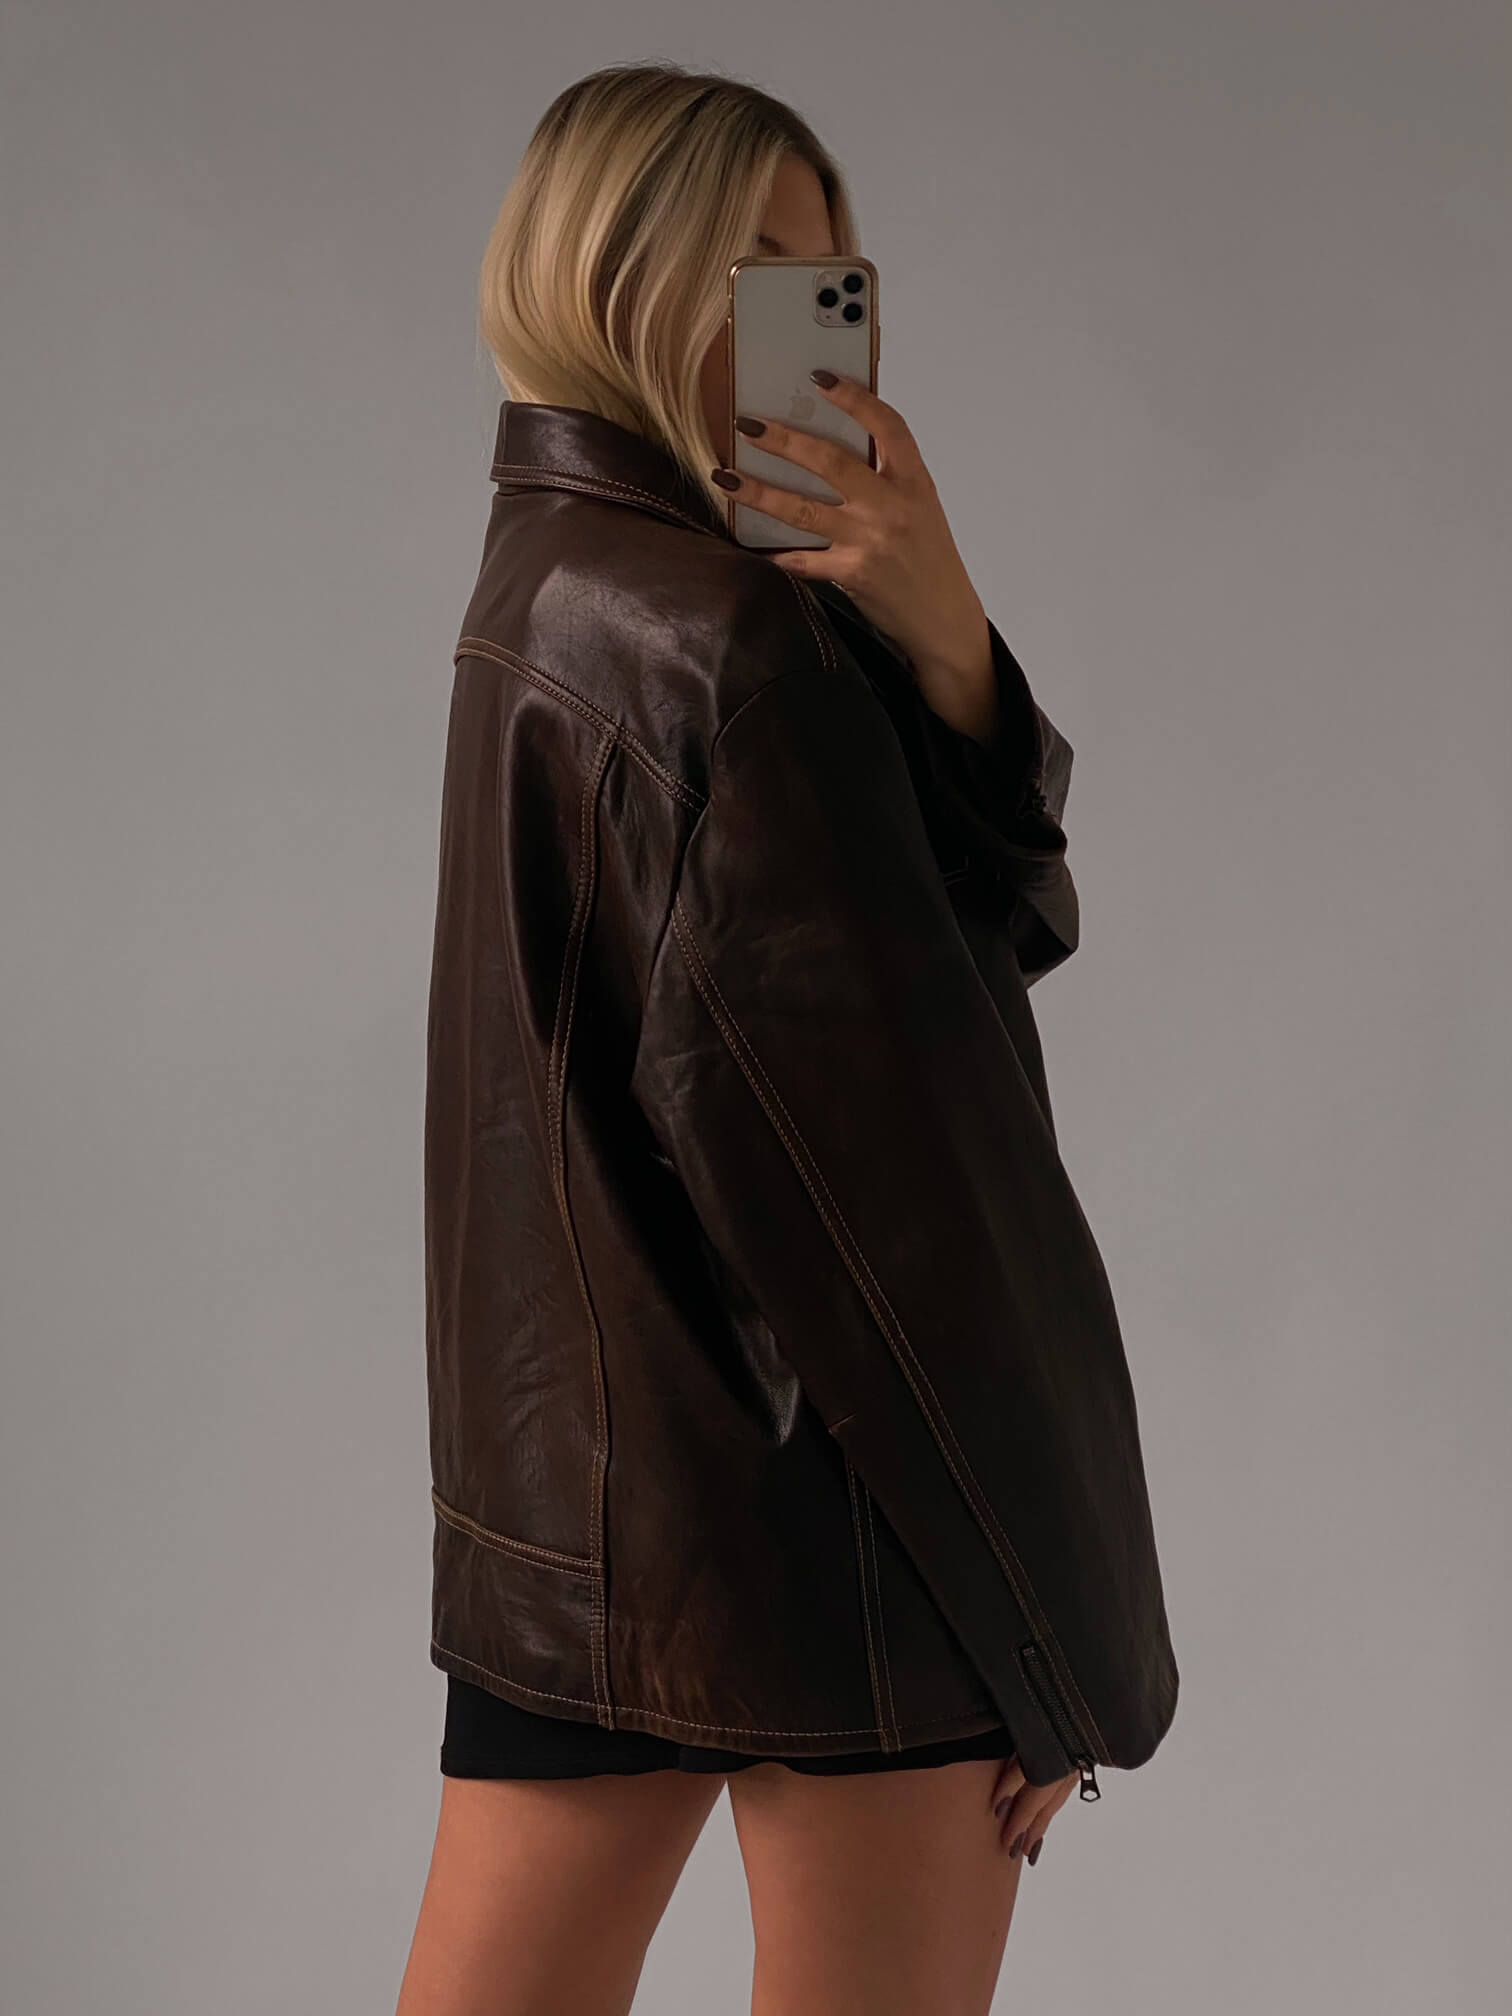 Vintage GUESS Oversized Chocolate Leather Jacket| XS-XL